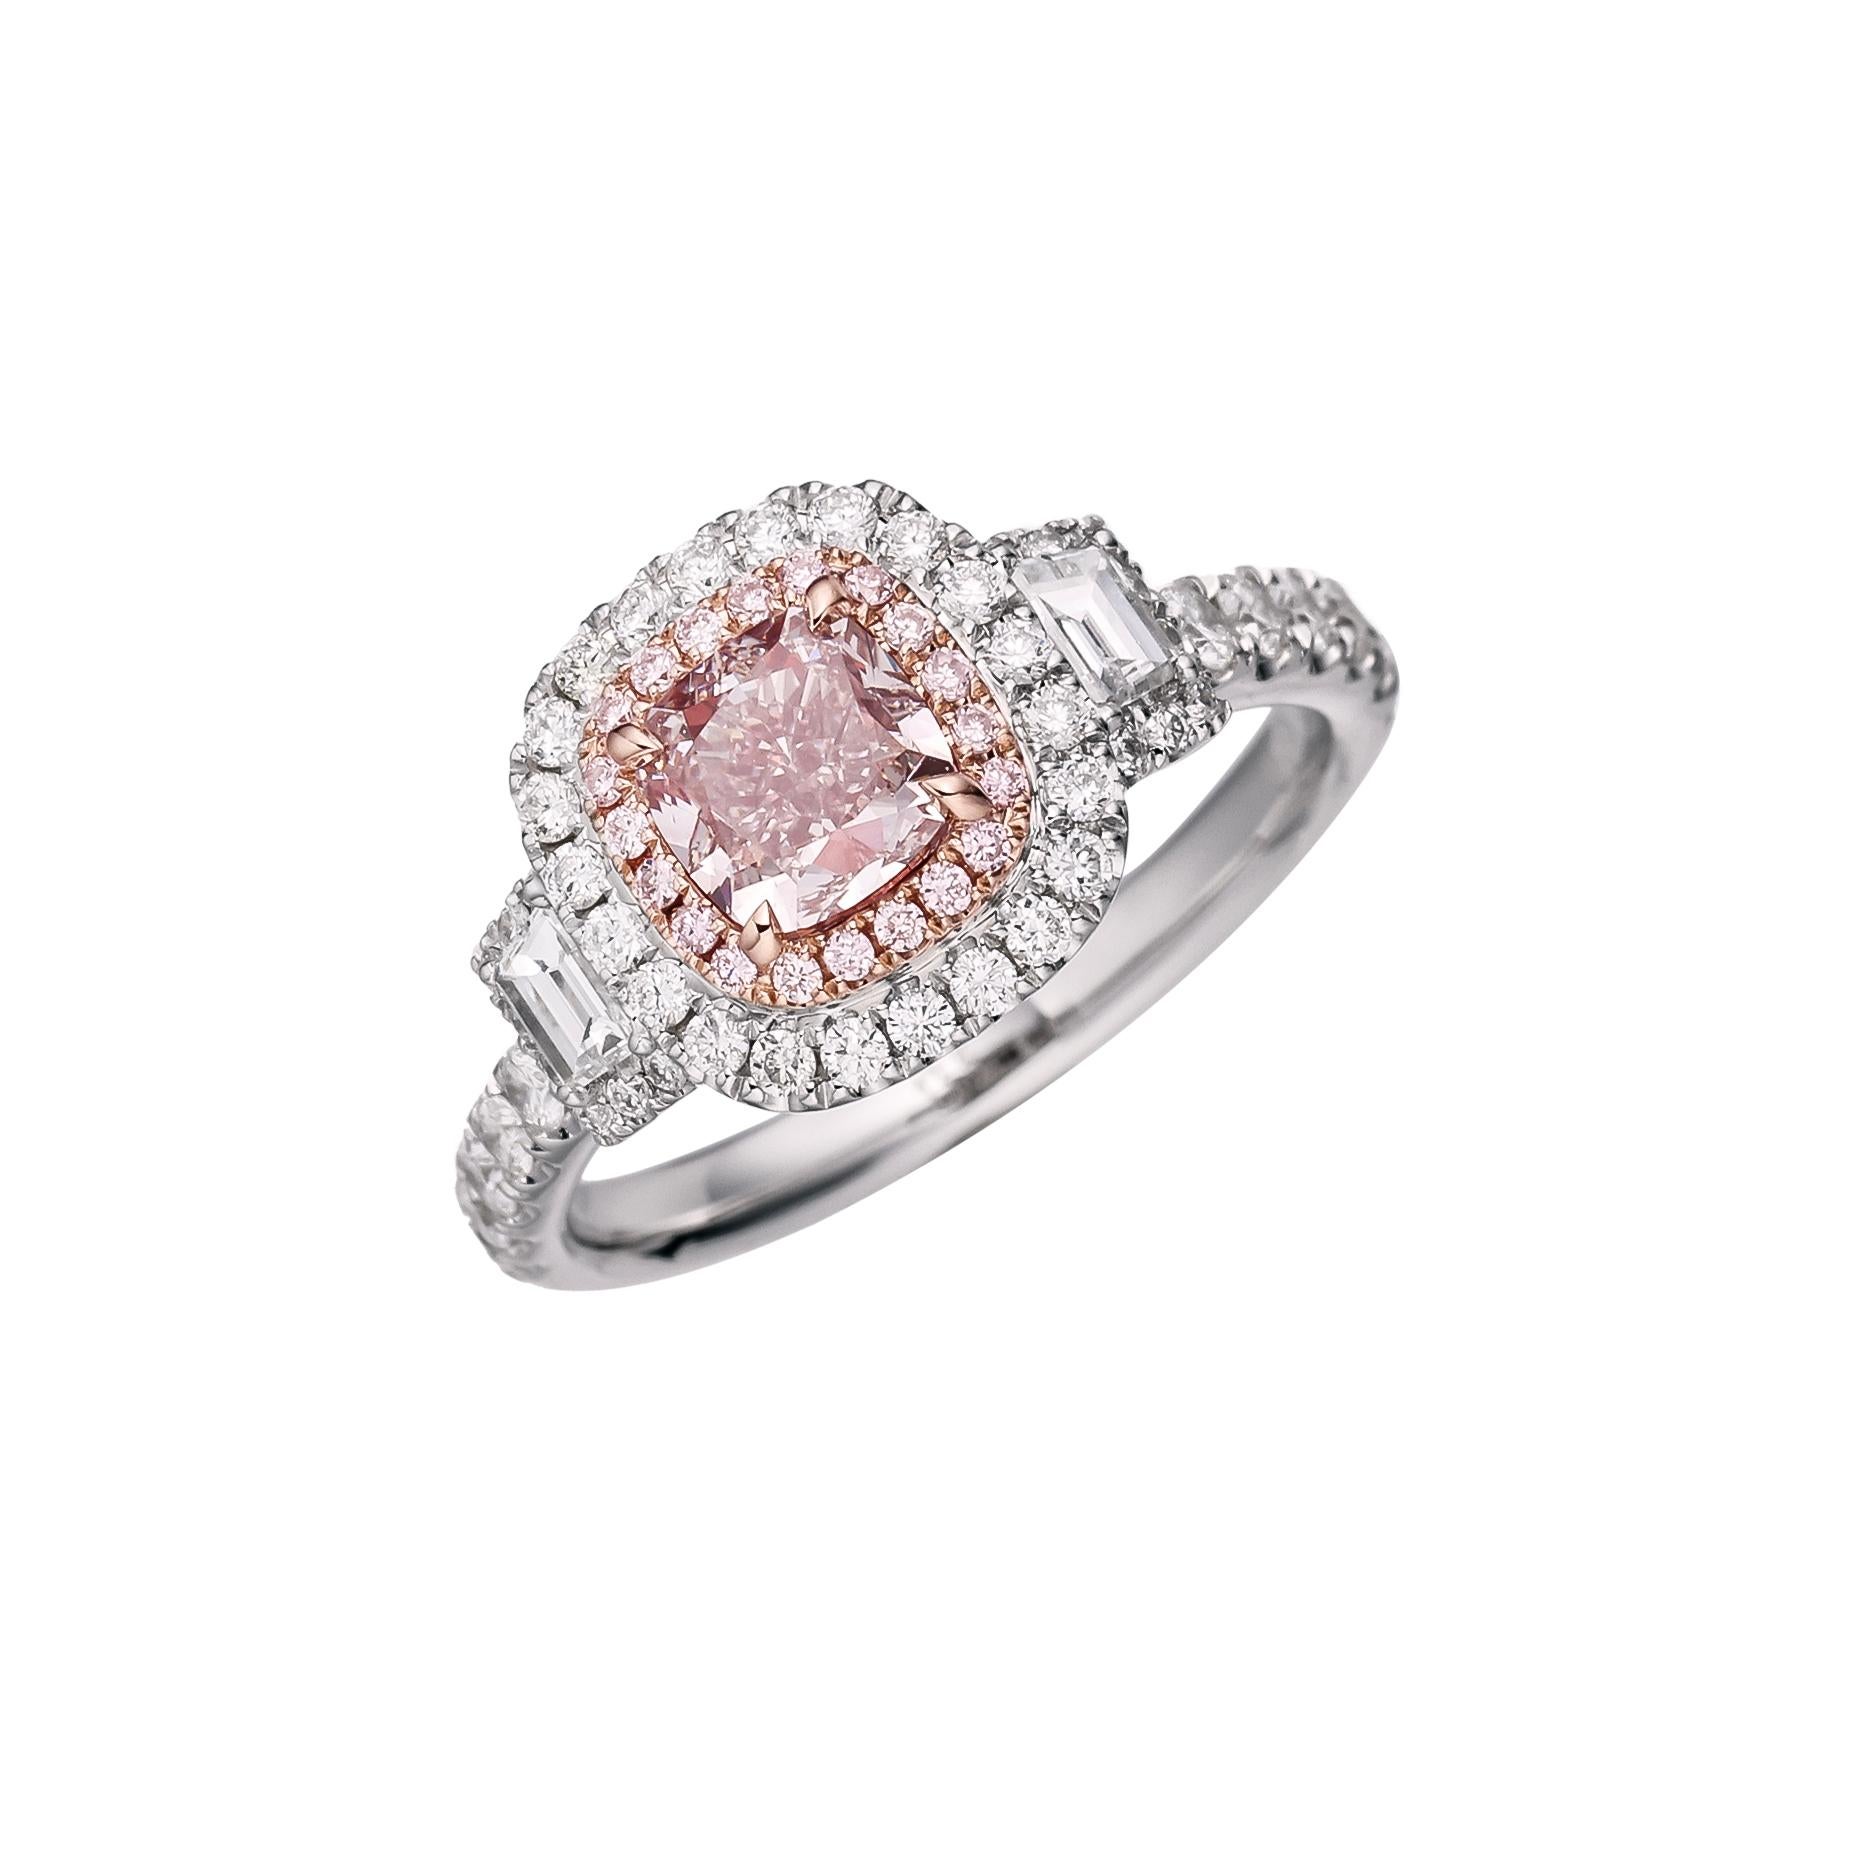 Unveil Elegance: Introducing the Luxurious GIA Certified 1.01ct Fancy Light Pinkish Brown Cushion Cut Natural Diamond Ring, a true embodiment of rare beauty and sophistication. Set upon a resplendent 18kt gold band, this ring is a testament to the